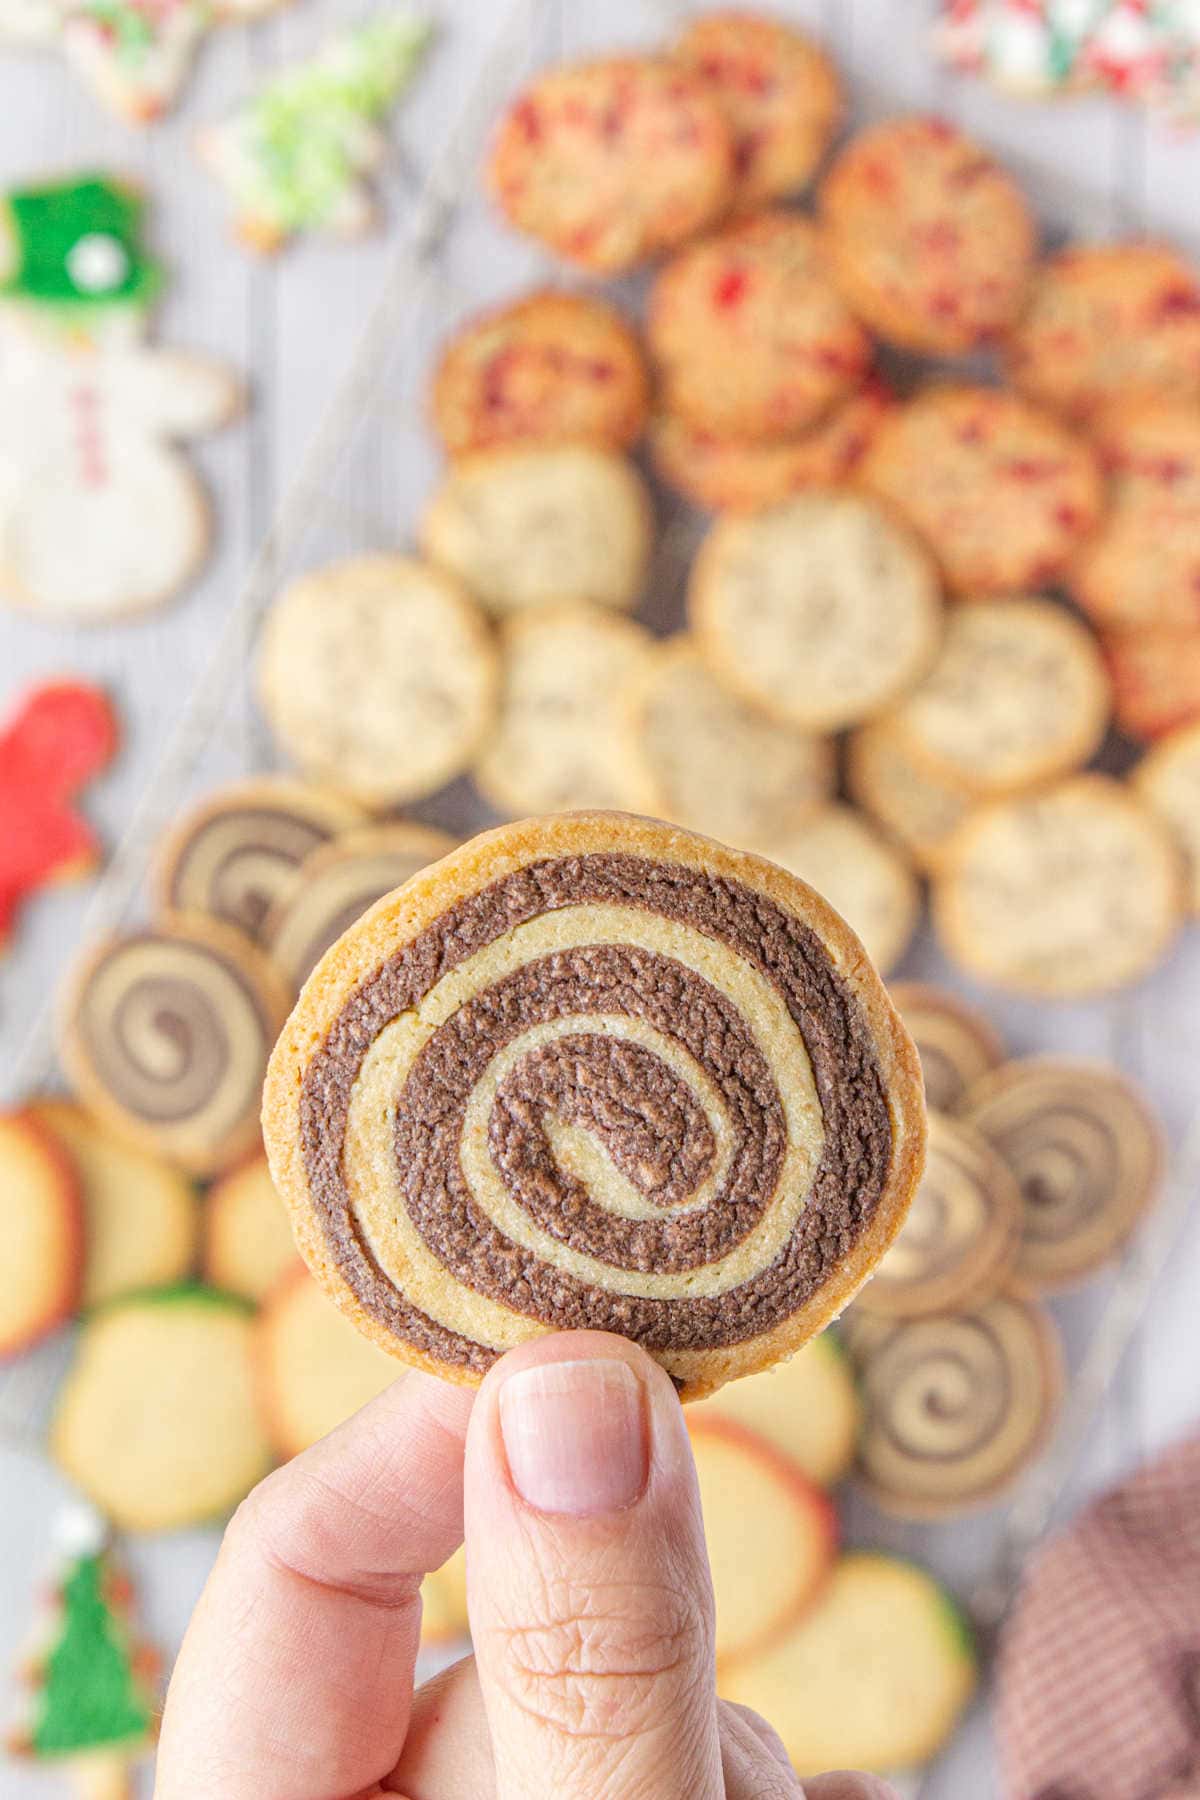 An up-close photo of a chocolate pinwheel sugar cookie. In the background, other cookies are shown on a platter.